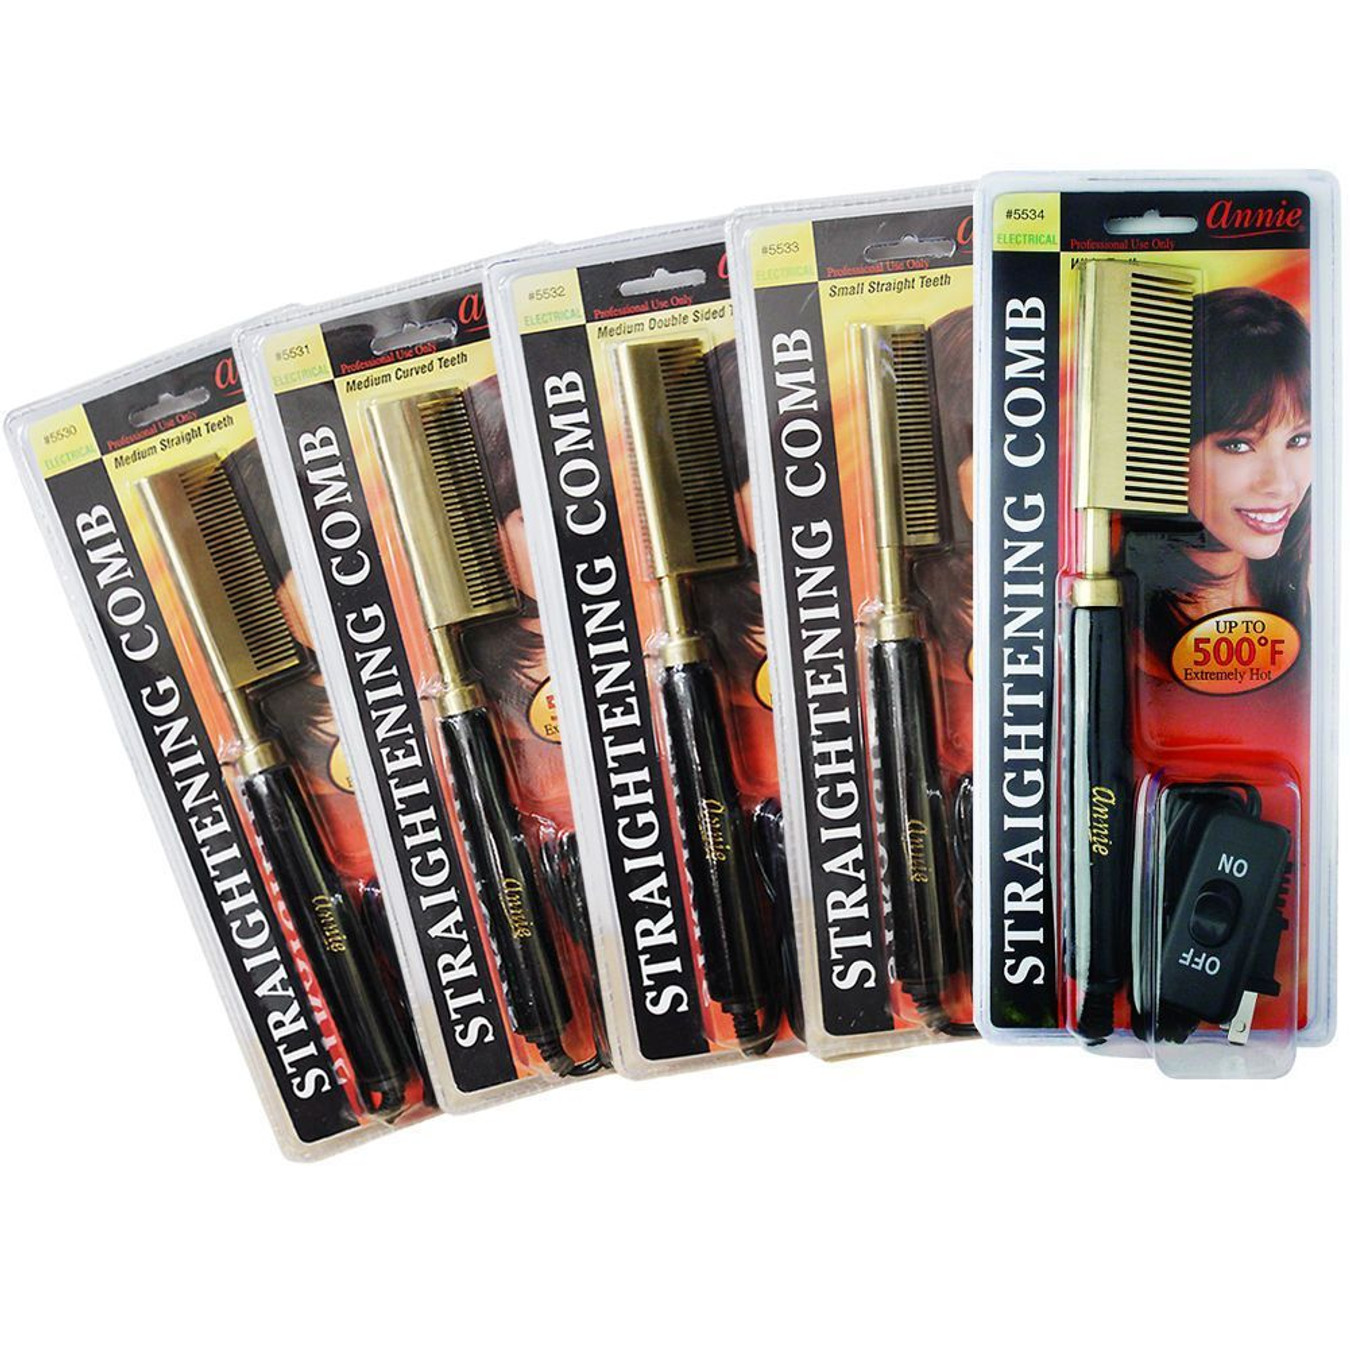 Annie Electrical Pressing Comb Collection